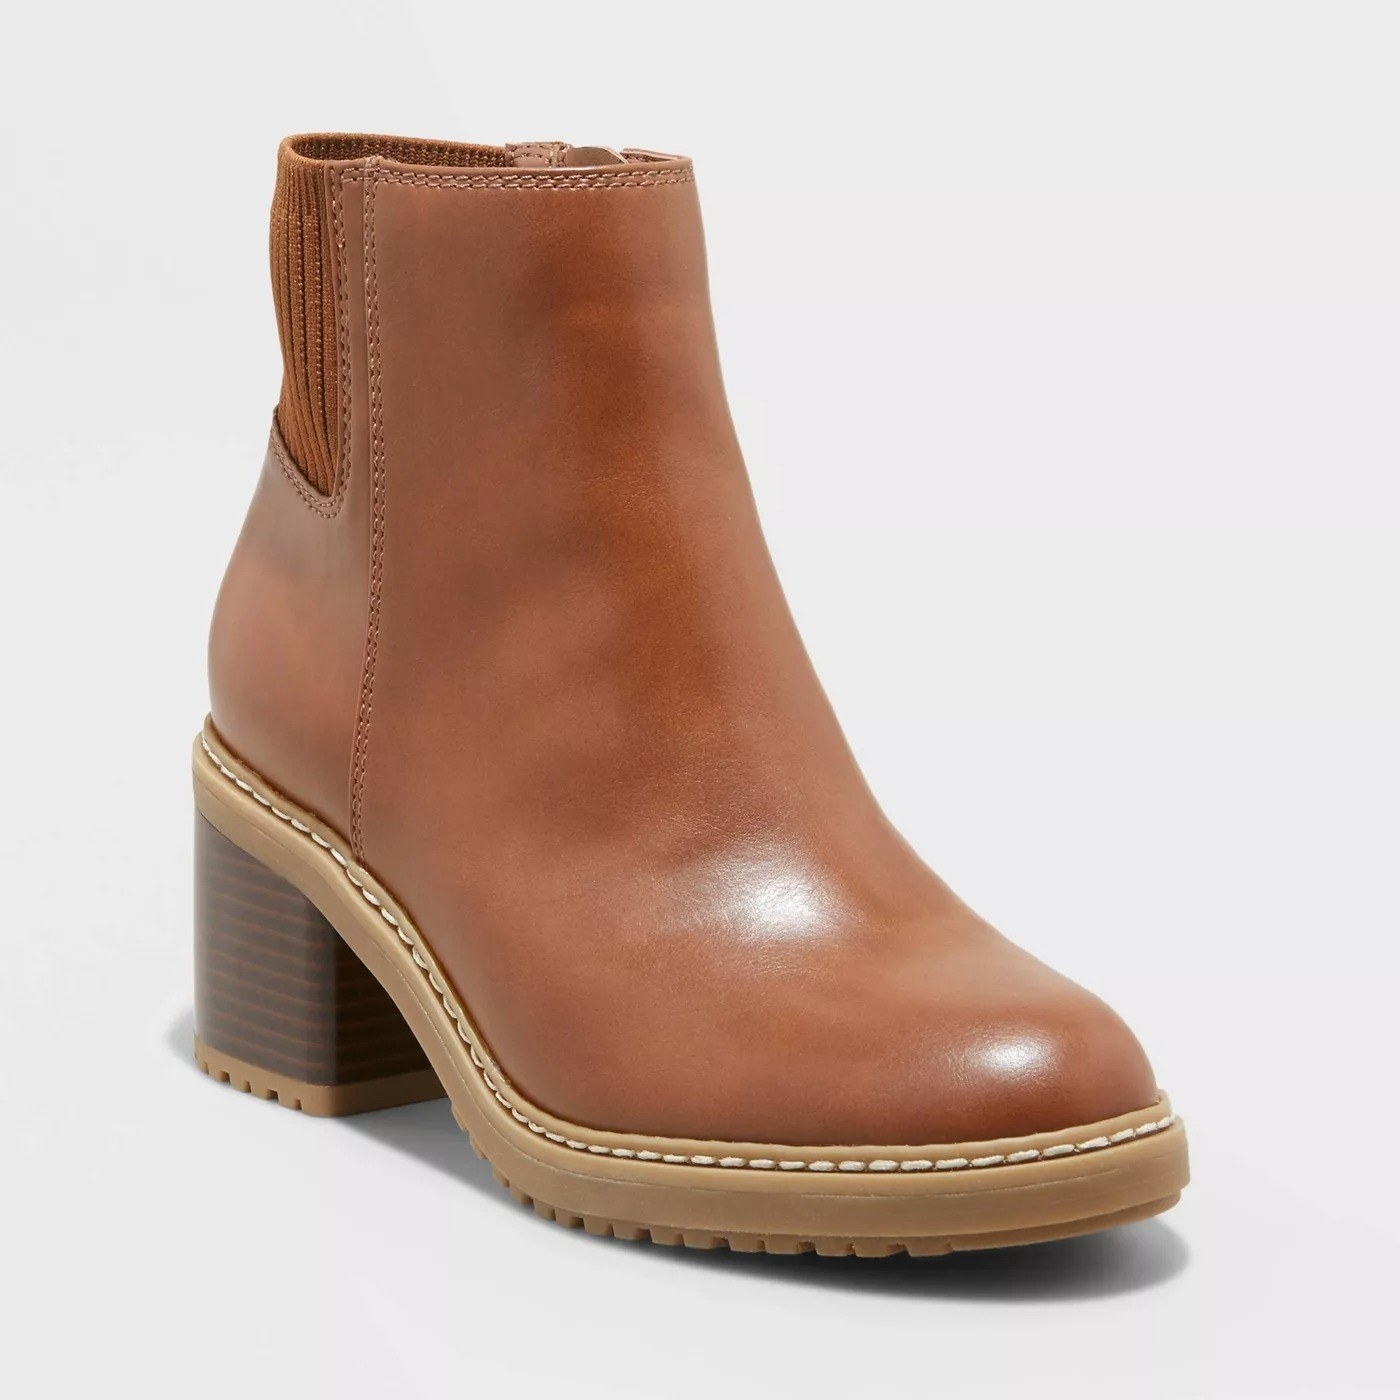 The brown boot with light brown sole and block heel